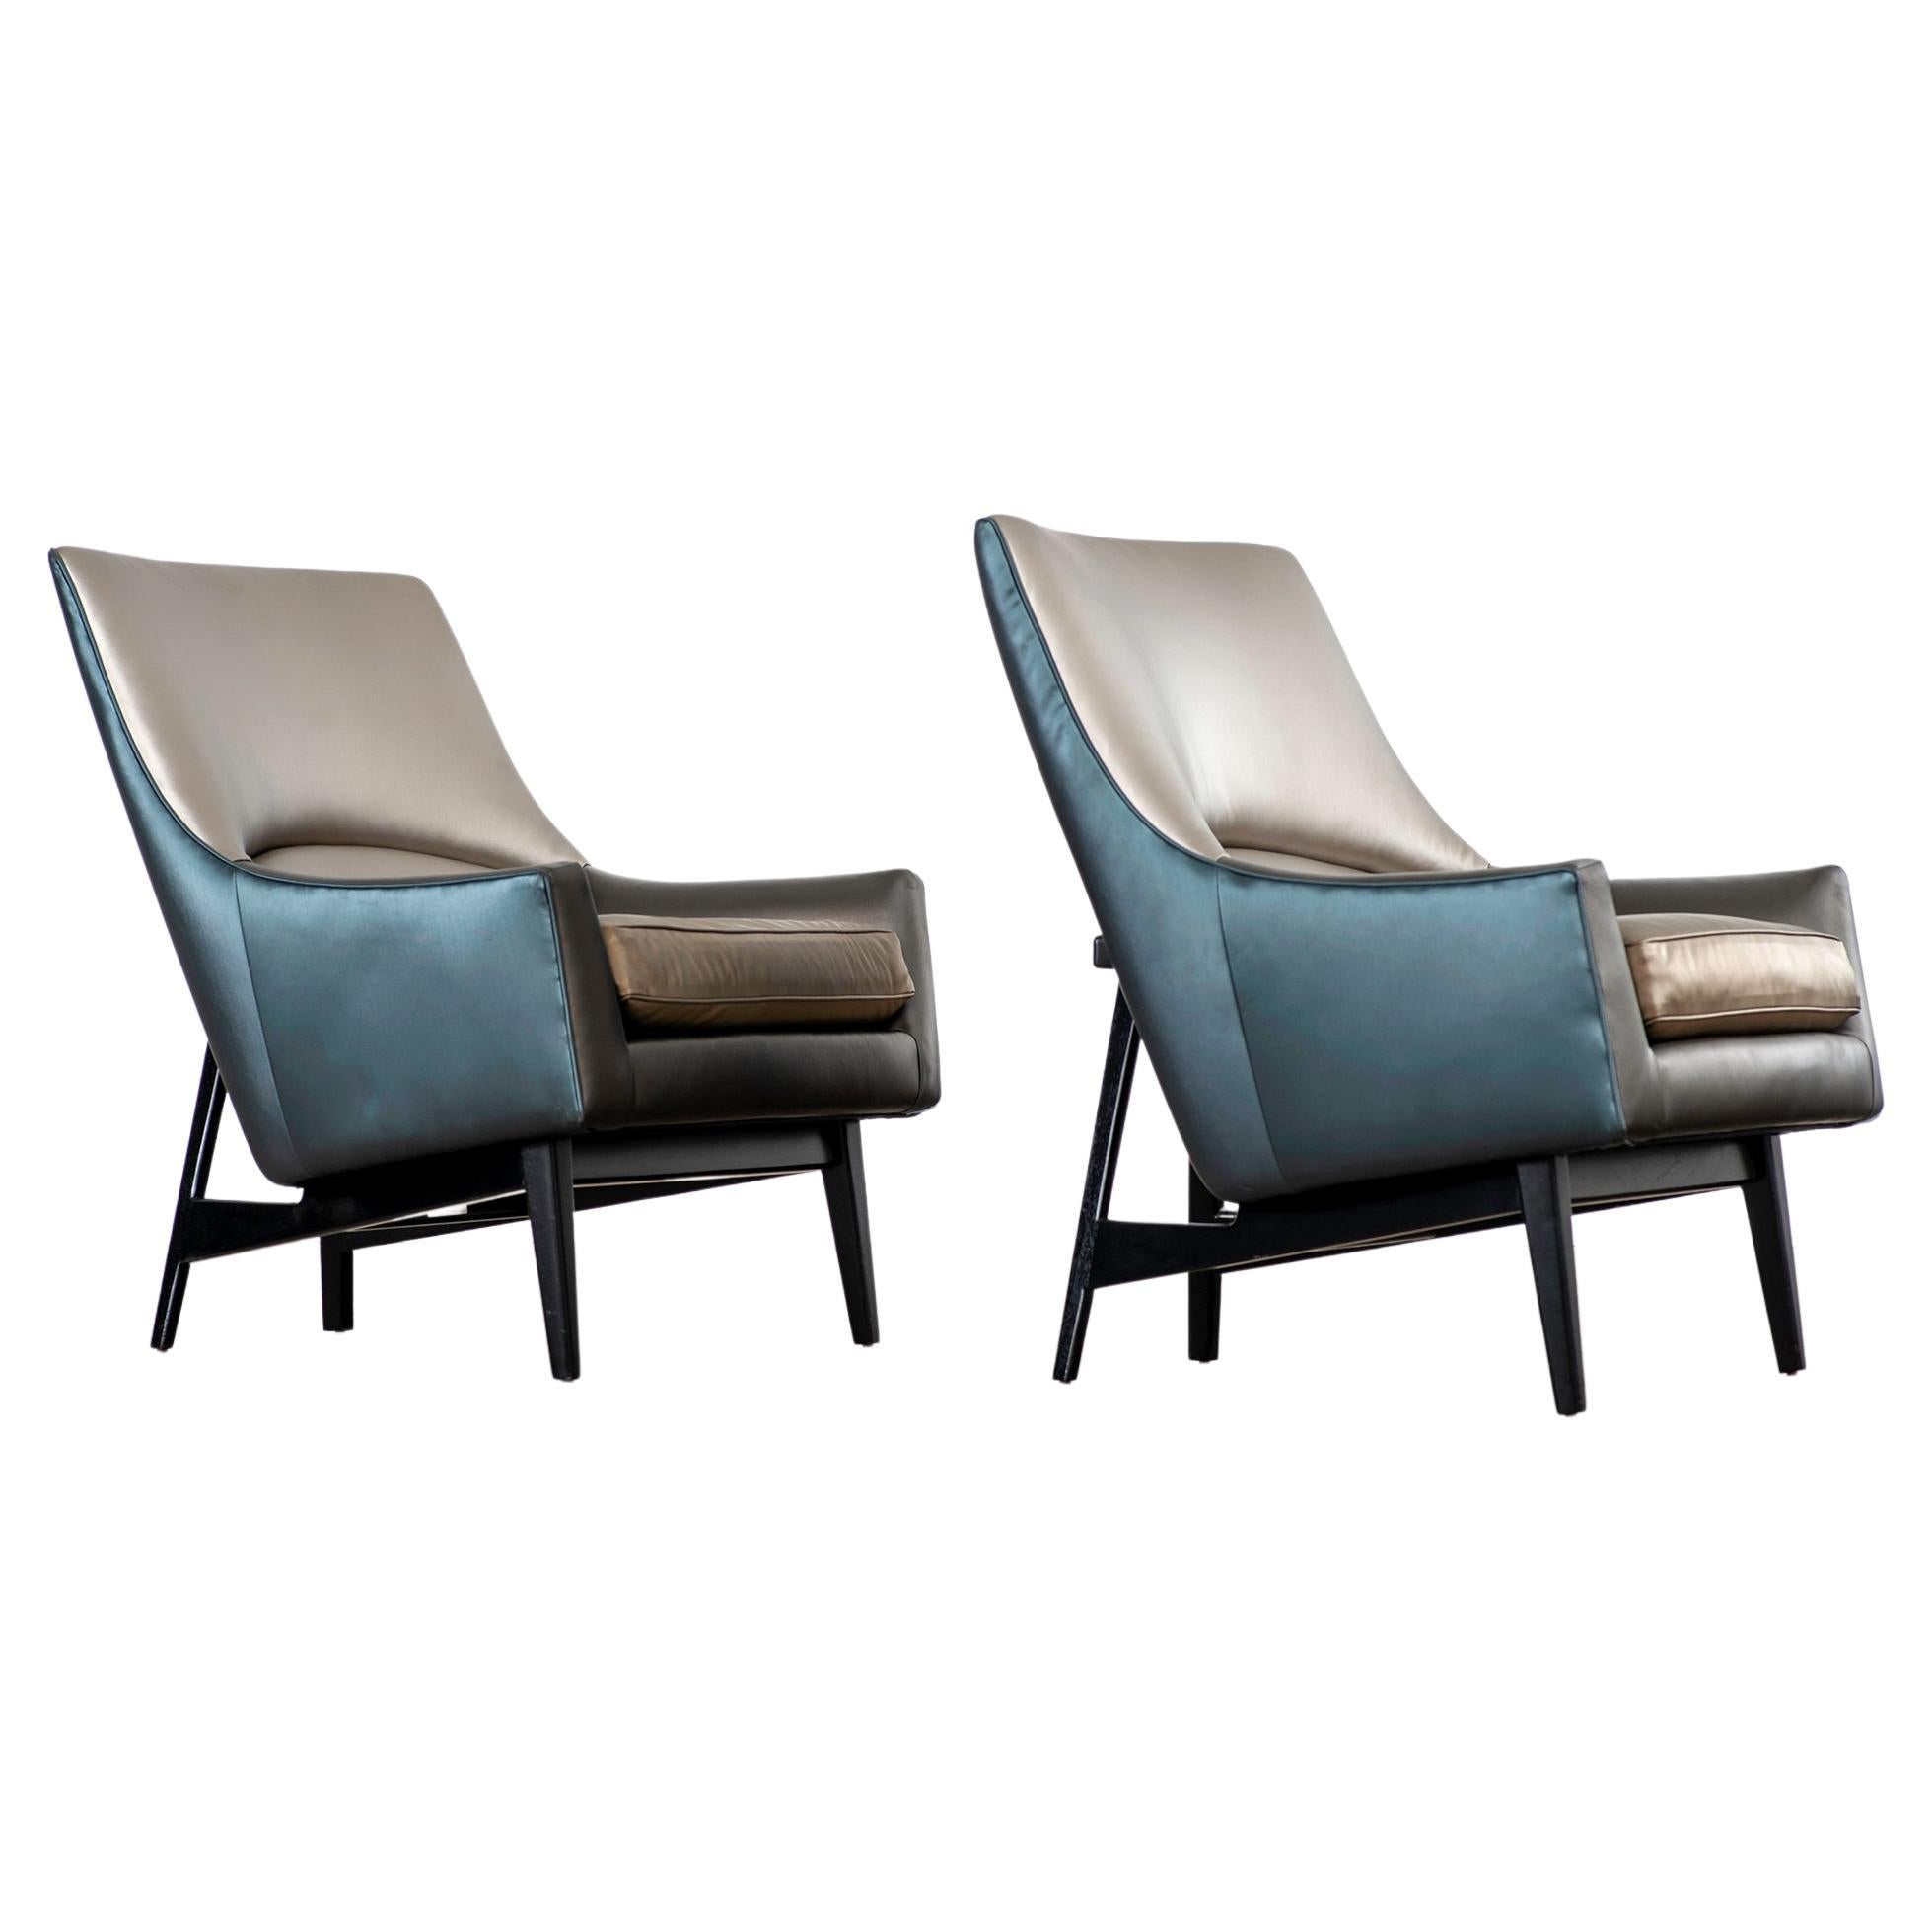 Pair of Jens Risom for Ralph Pucci Metallic Space Age A-Chairs